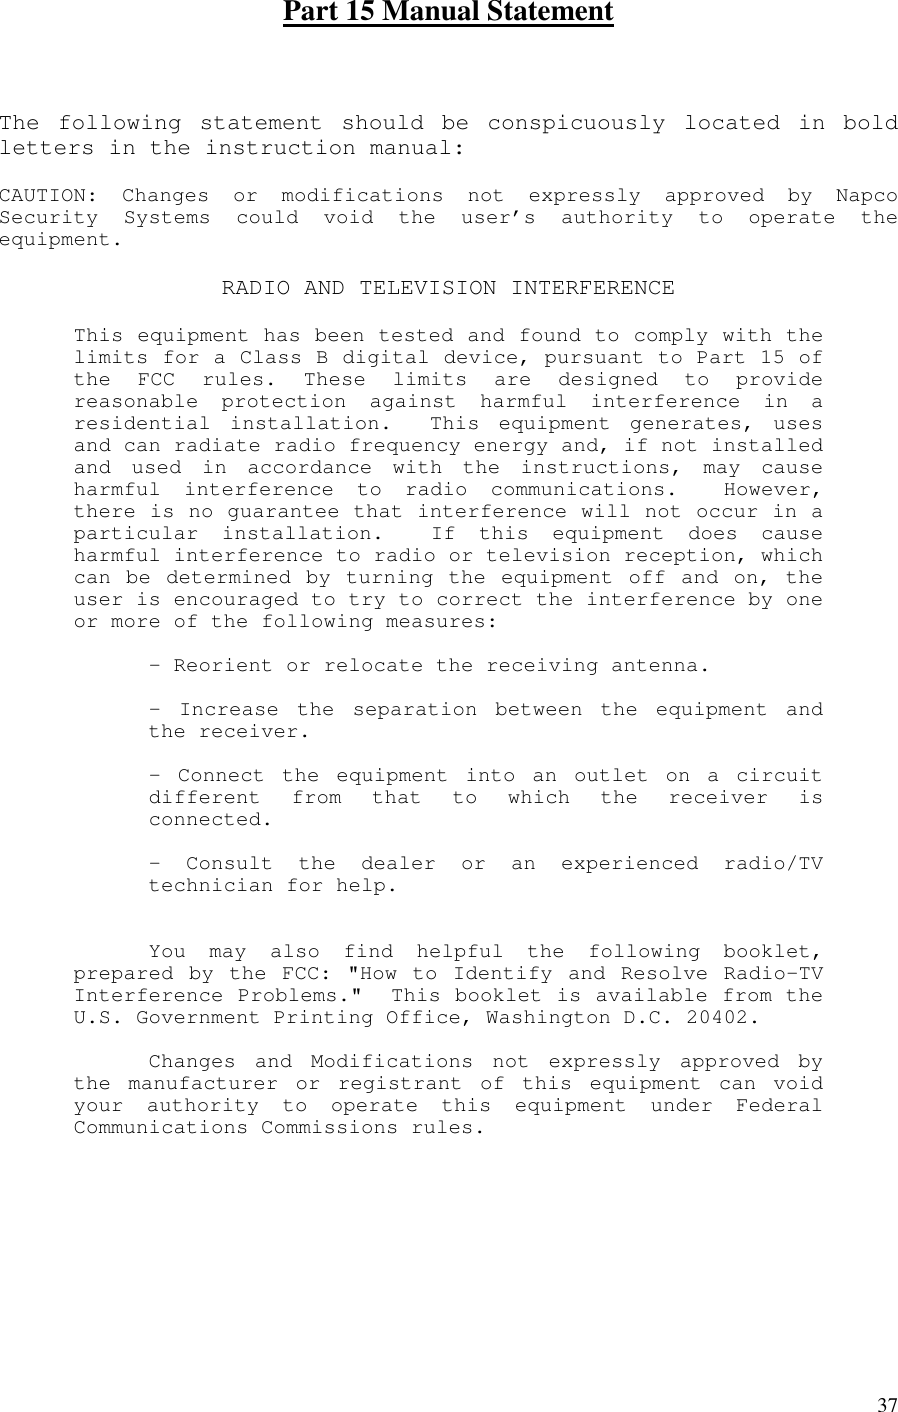   37Part 15 Manual Statement  The following statement should be conspicuously located in boldletters in the instruction manual:CAUTION: Changes or modifications not expressly approved by NapcoSecurity Systems could void the user’s authority to operate theequipment.RADIO AND TELEVISION INTERFERENCEThis equipment has been tested and found to comply with thelimits for a Class B digital device, pursuant to Part 15 ofthe FCC rules. These limits are designed to providereasonable protection against harmful interference in aresidential installation. This equipment generates, usesand can radiate radio frequency energy and, if not installedand used in accordance with the instructions, may causeharmful interference to radio communications. However,there is no guarantee that interference will not occur in aparticular installation. If this equipment does causeharmful interference to radio or television reception, whichcan be determined by turning the equipment off and on, theuser is encouraged to try to correct the interference by oneor more of the following measures:- Reorient or relocate the receiving antenna.- Increase the separation between the equipment andthe receiver.- Connect the equipment into an outlet on a circuitdifferent from that to which the receiver isconnected.- Consult the dealer or an experienced radio/TVtechnician for help.You may also find helpful the following booklet,prepared by the FCC: &quot;How to Identify and Resolve Radio-TVInterference Problems.&quot; This booklet is available from theU.S. Government Printing Office, Washington D.C. 20402.Changes and Modifications not expressly approved bythe manufacturer or registrant of this equipment can voidyour authority to operate this equipment under FederalCommunications Commissions rules.